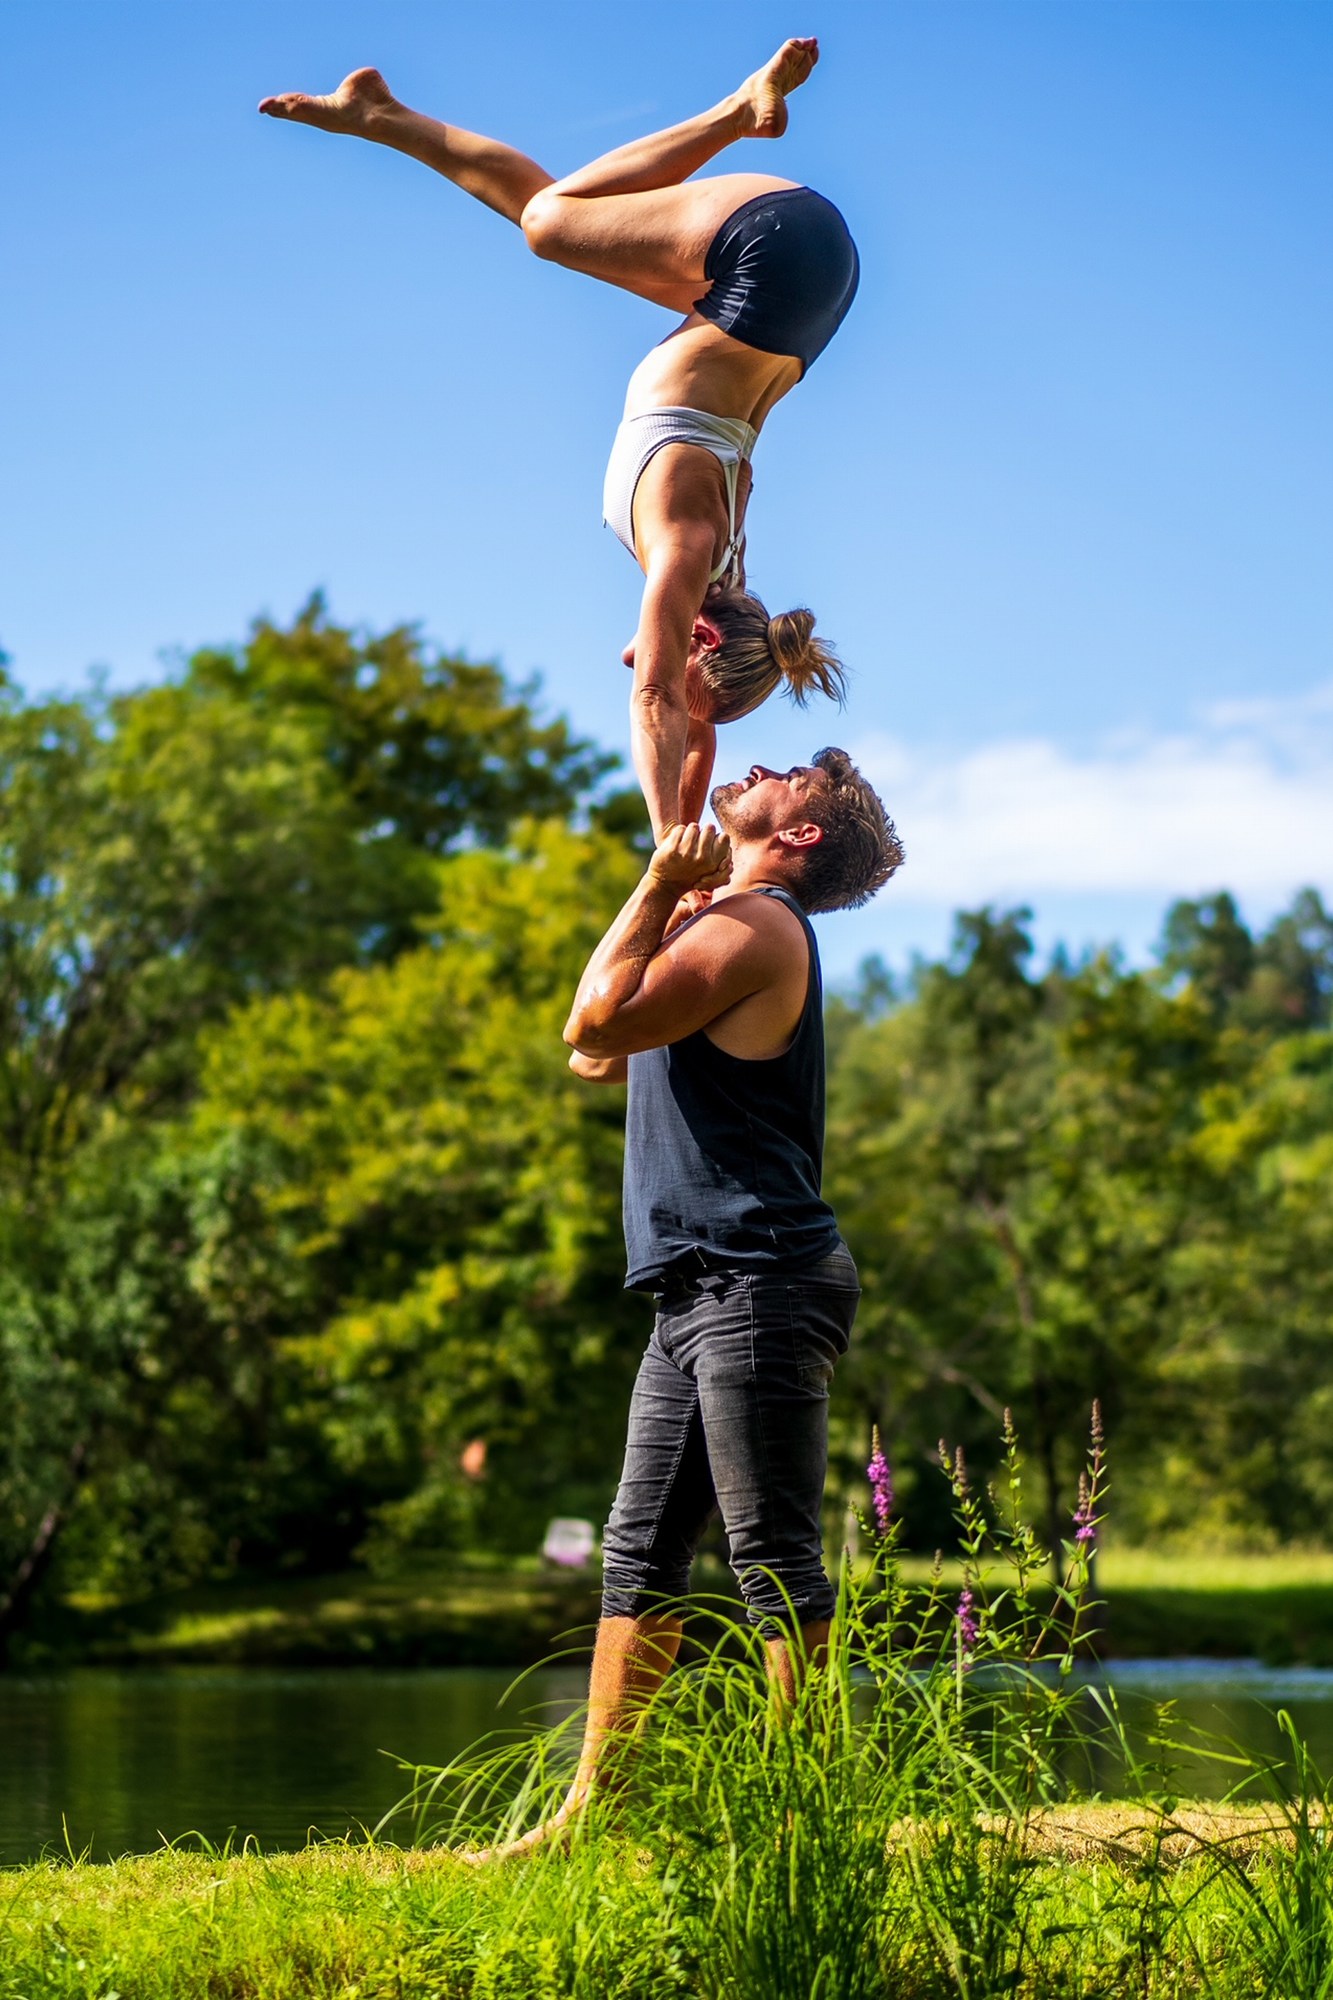 Girl being upside down in a handstand, balancing on a guys hand overlooking a green landscape and lake during a hot summer day.